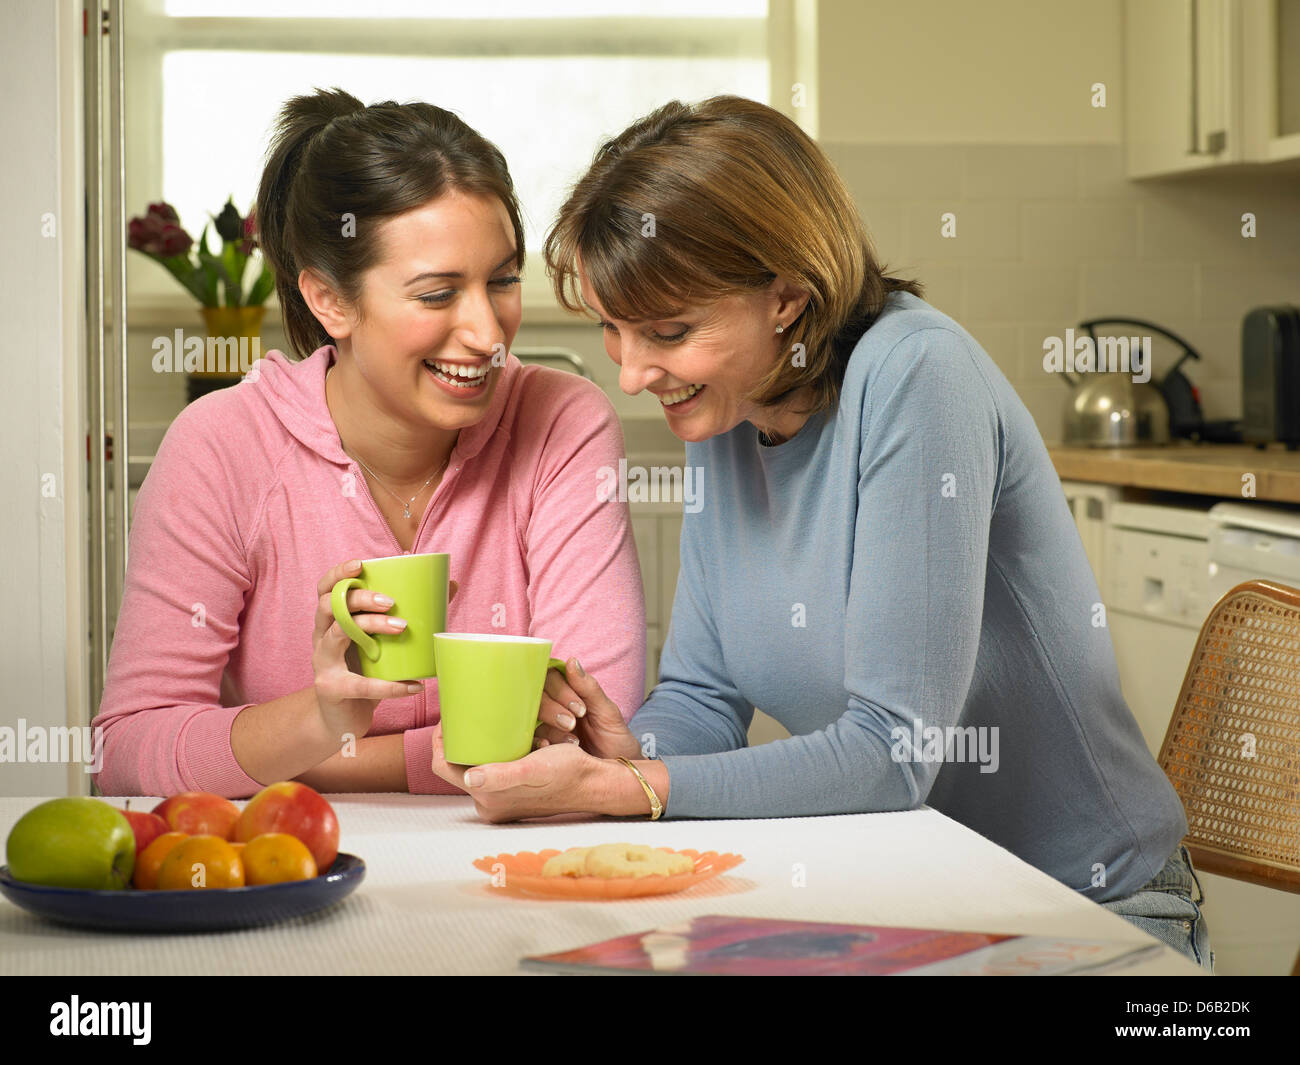 Women having coffee together in kitchen Stock Photo